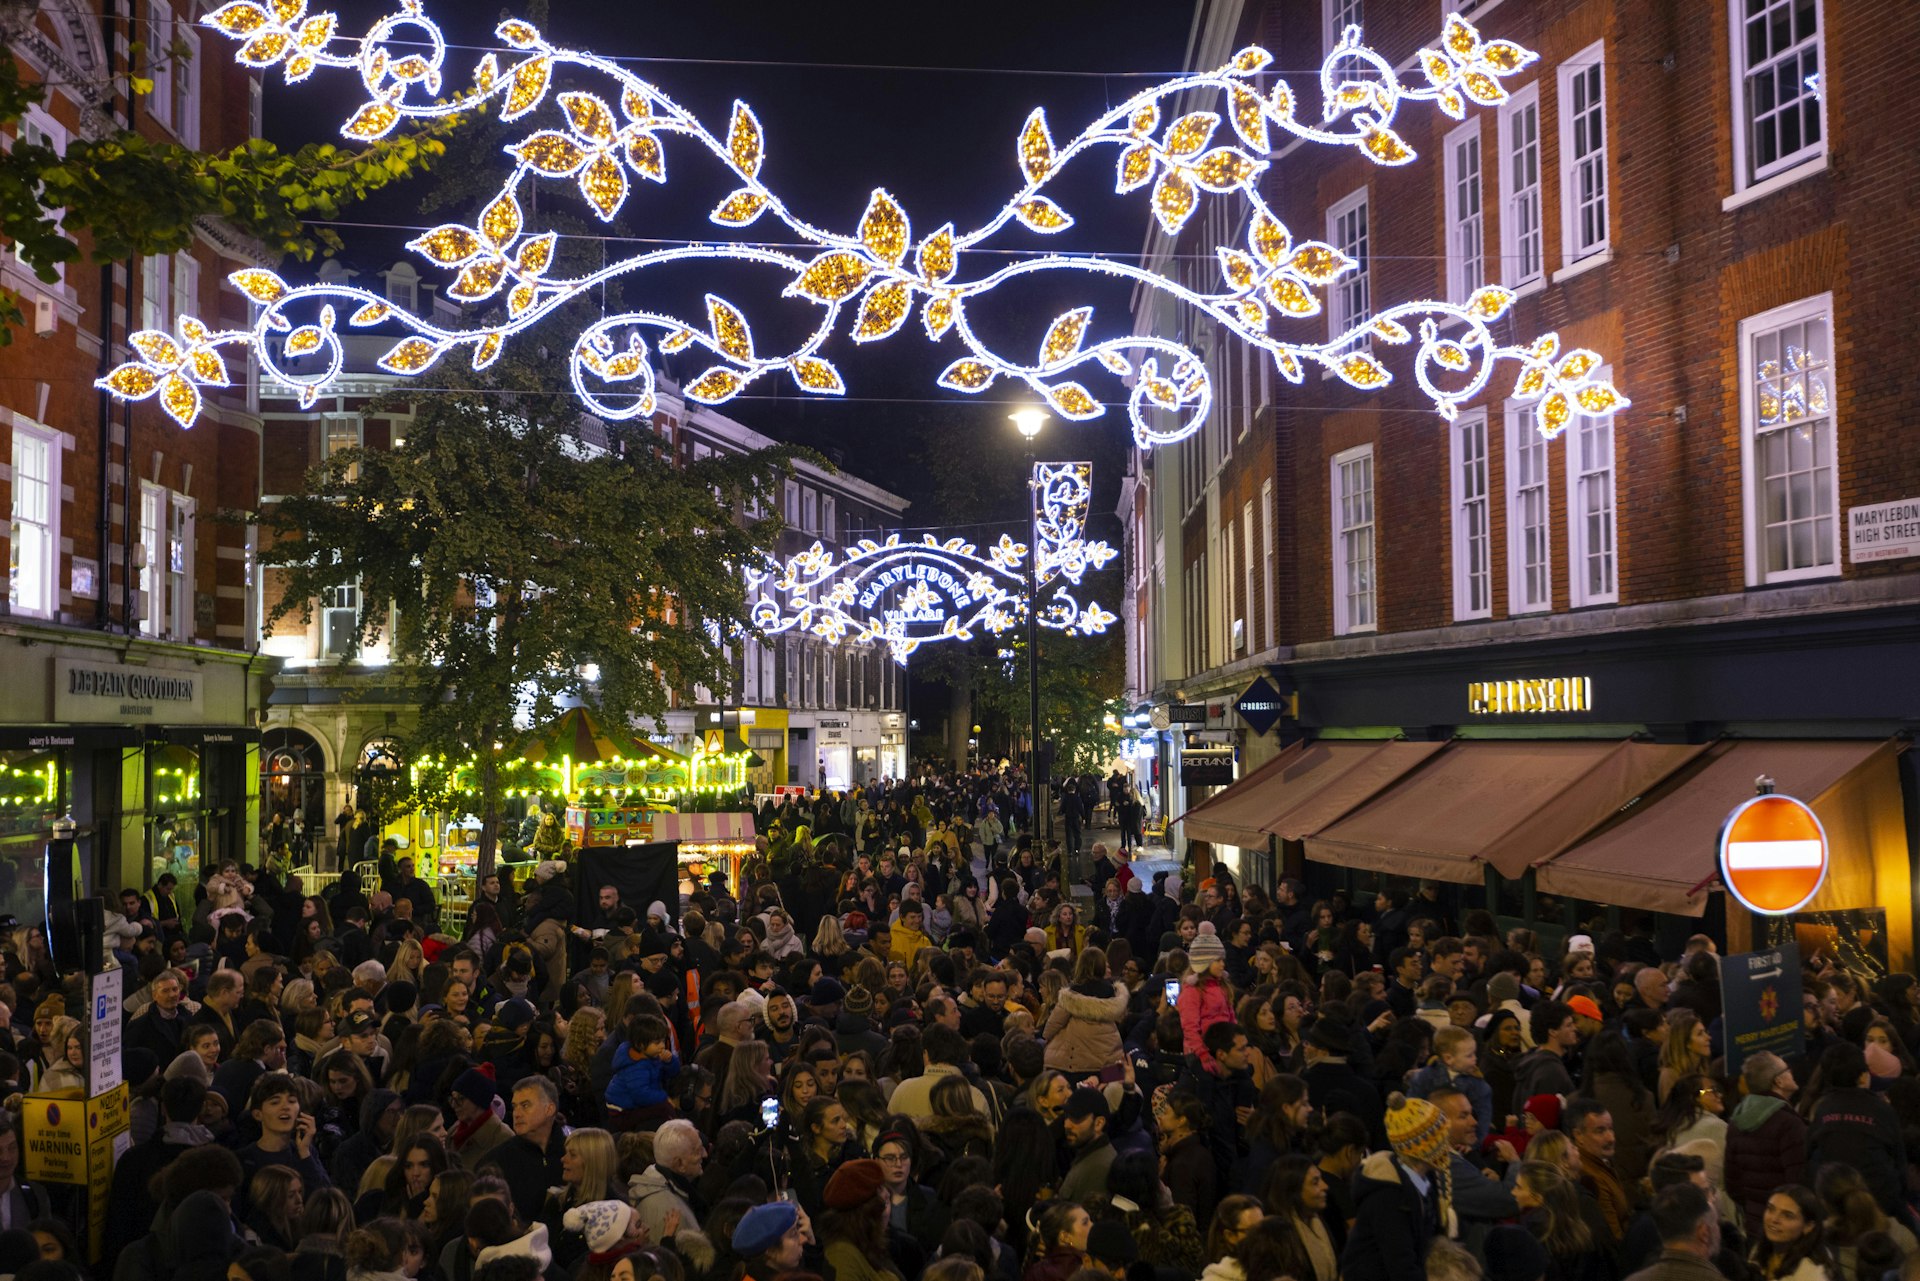 Members of the public watch the Merry Marylebone Christmas lights being switched on in London, England, UK